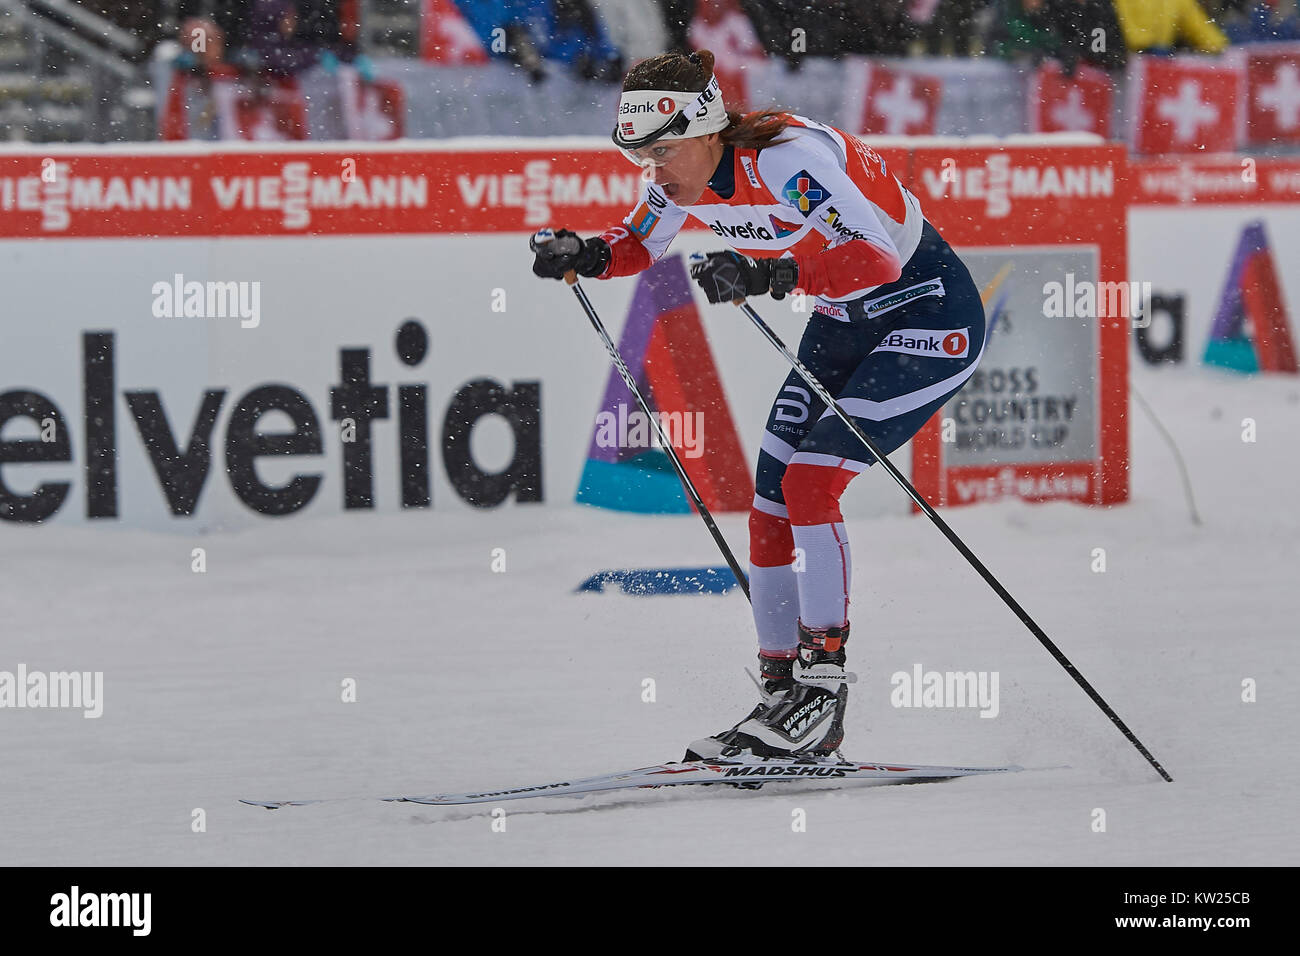 Lenzerheide, Switzerland, 30th December 2017. WENG Heidi (NOR) during the Ladies’ 1.5 km Sprint Competition at the FIS Cross Country Worldcup Tour de Ski 2017 in Lenzerheide. Photo: Cronos/Rolf Simeon/Alamy Live News Stock Photo